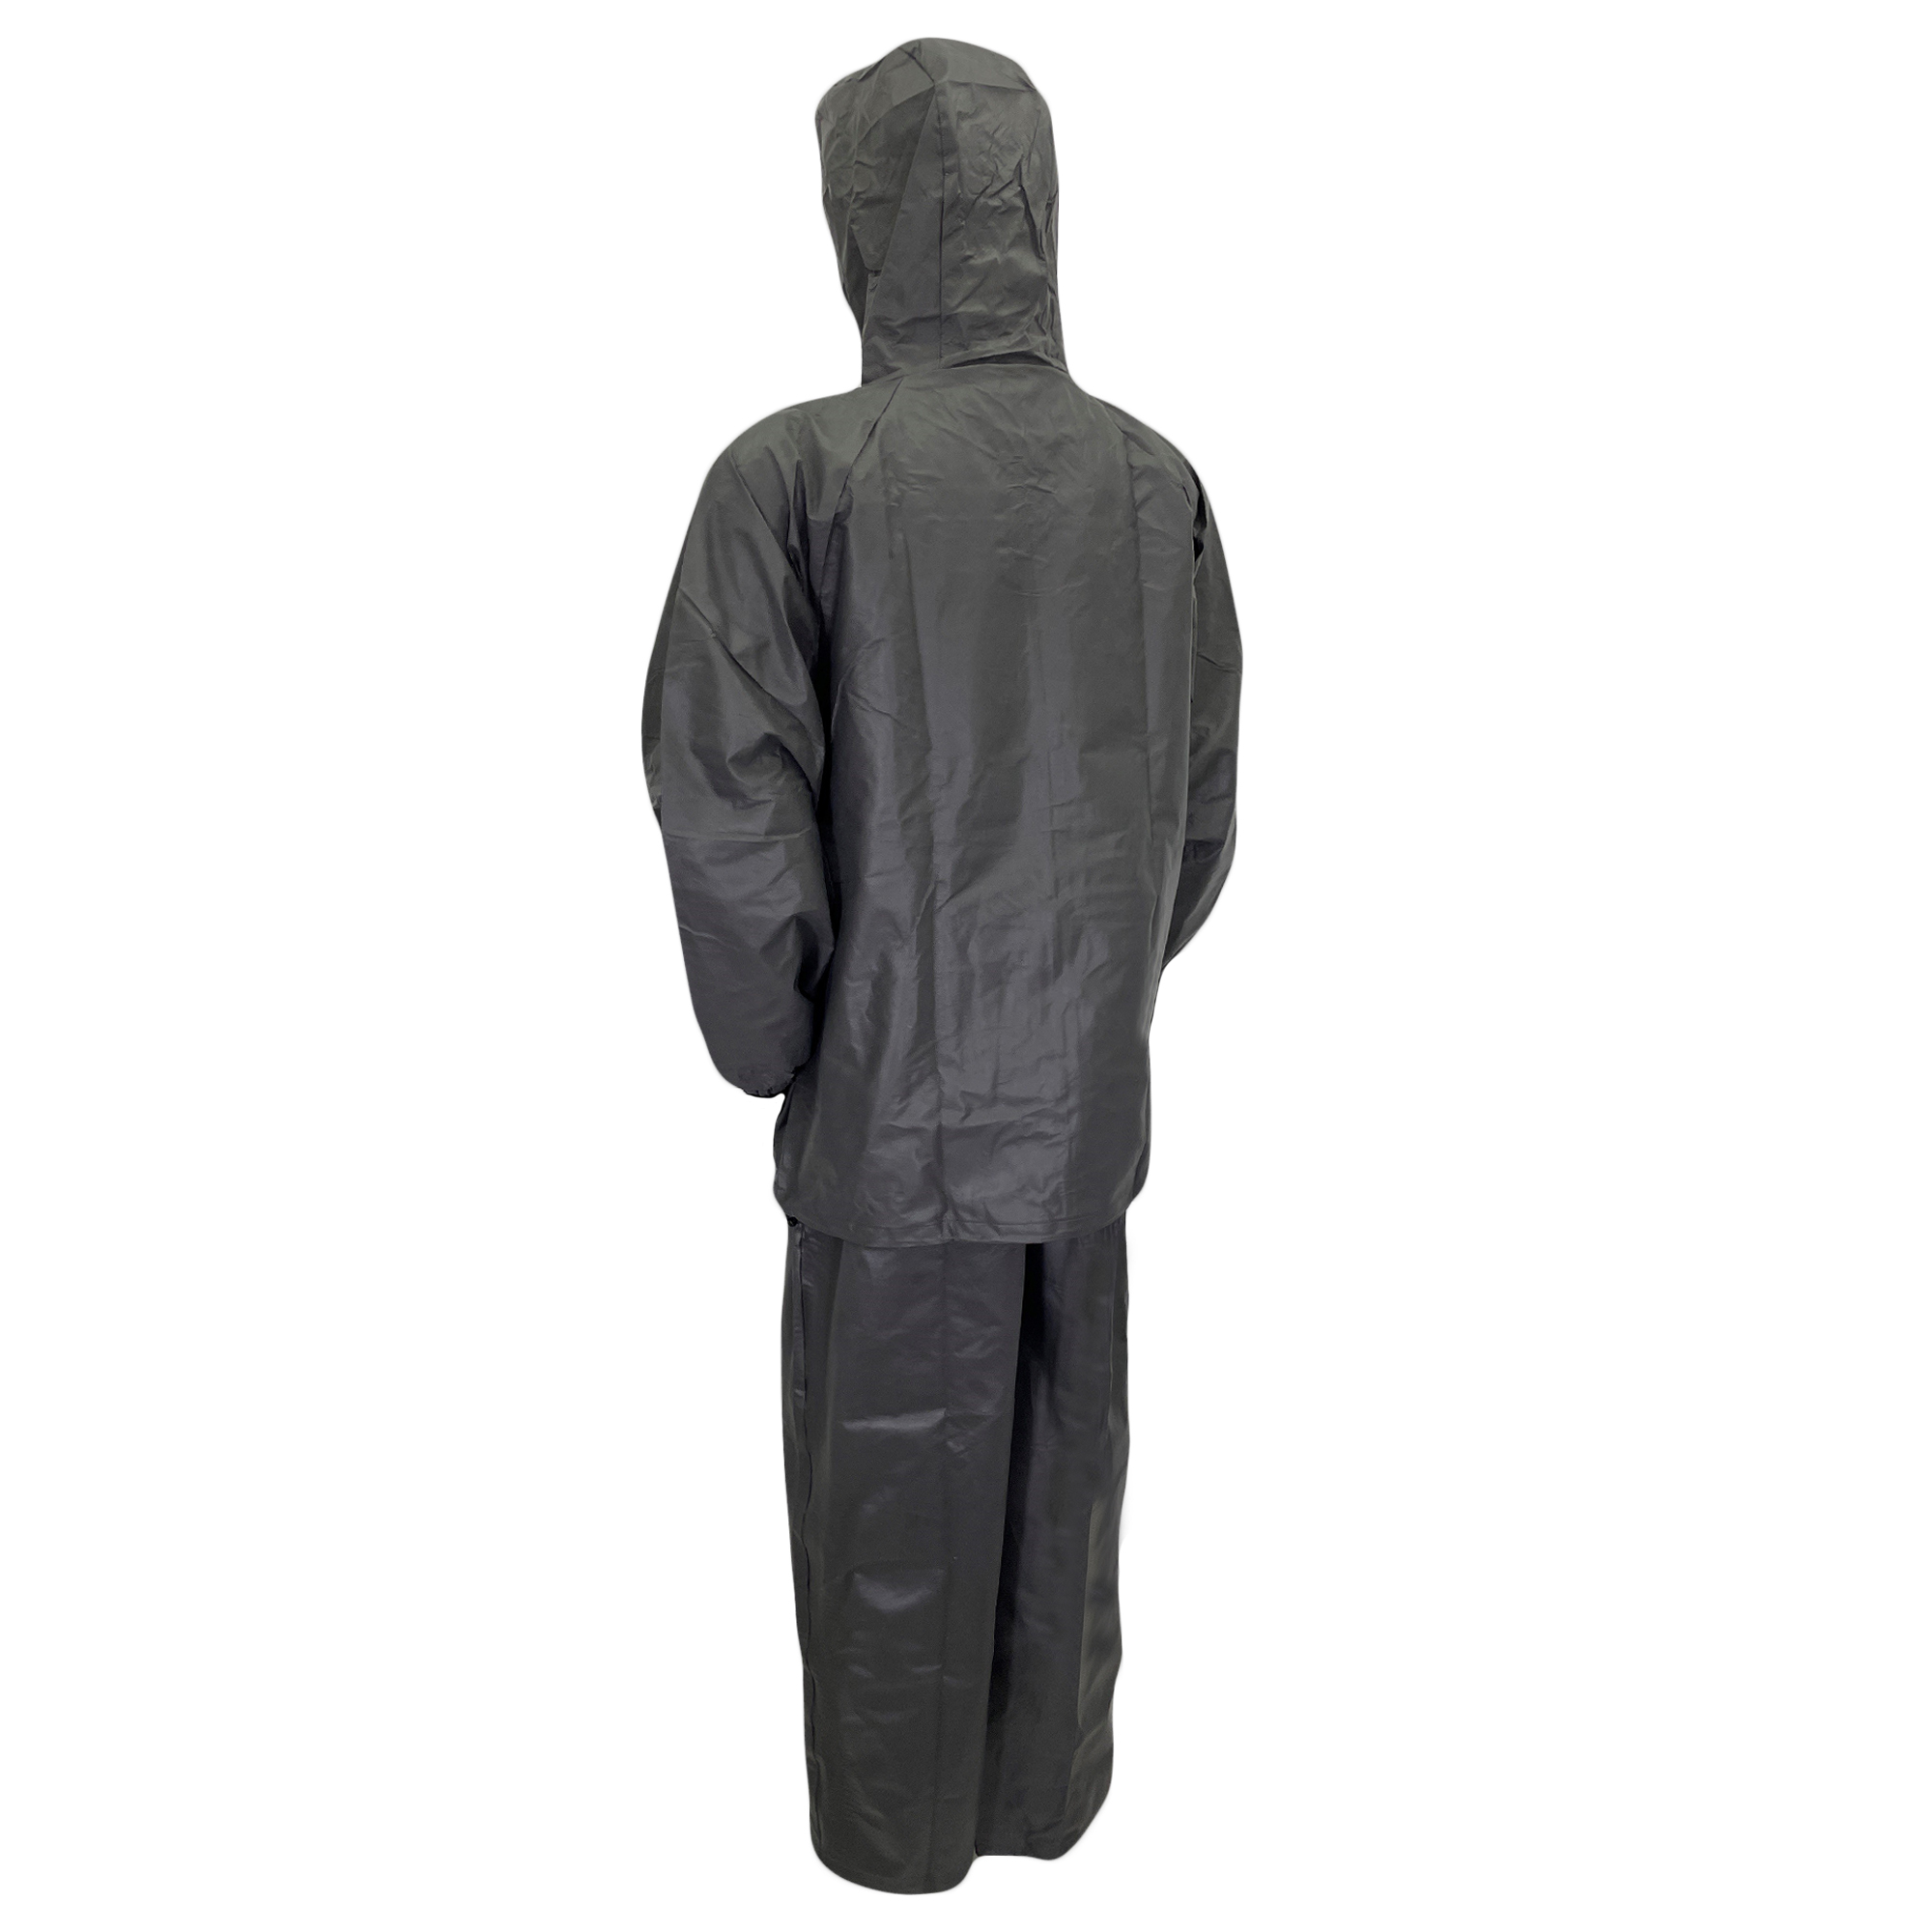 Frogg Toggs Men's Pro Lite Rain Suit with Pockets 